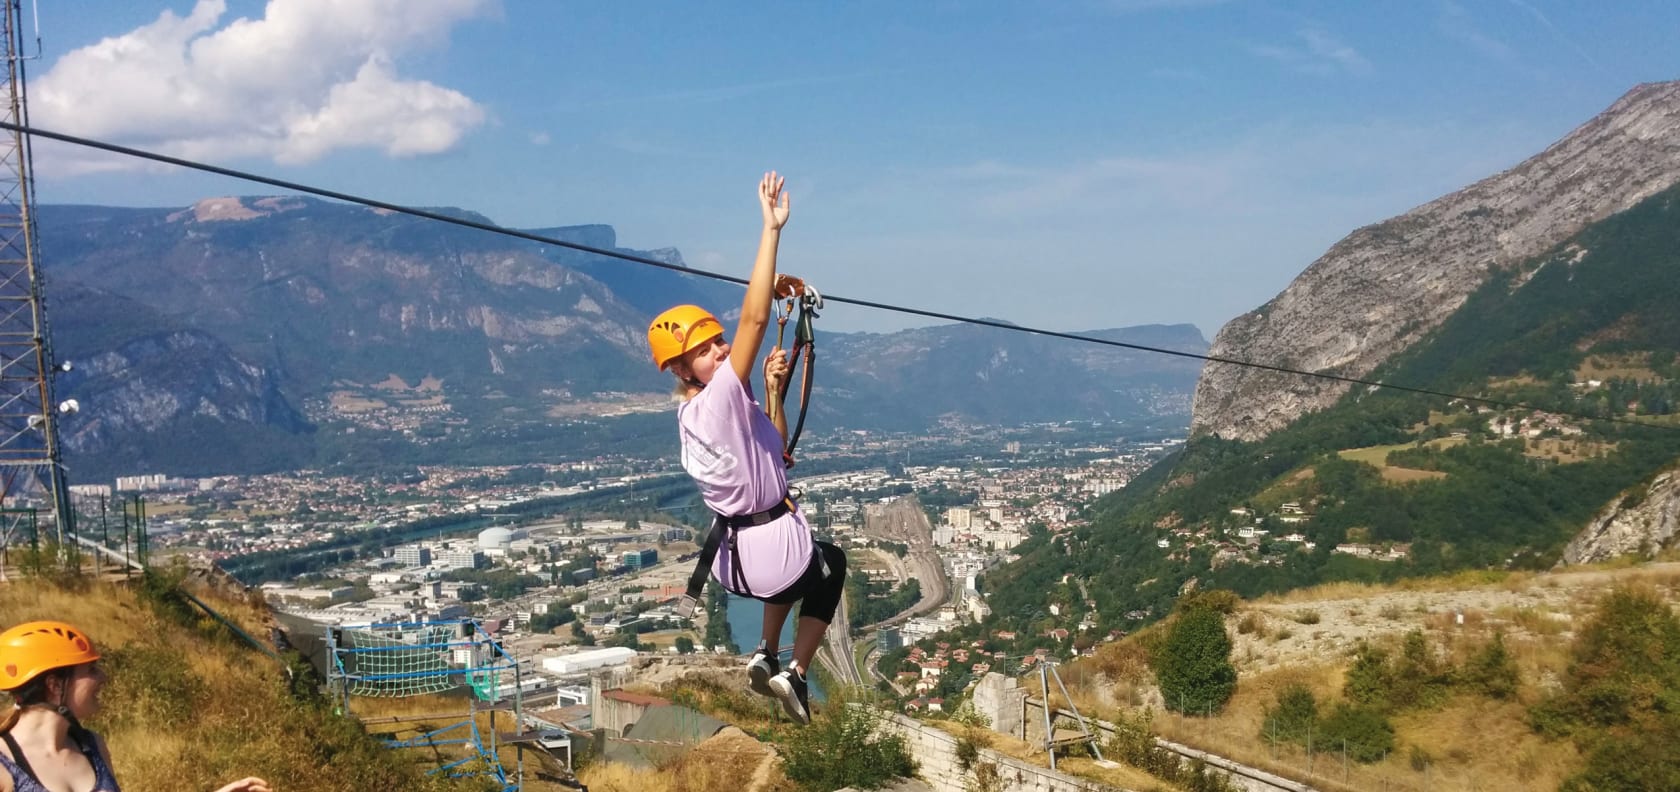 Person on a zipline in Grenoble, France.